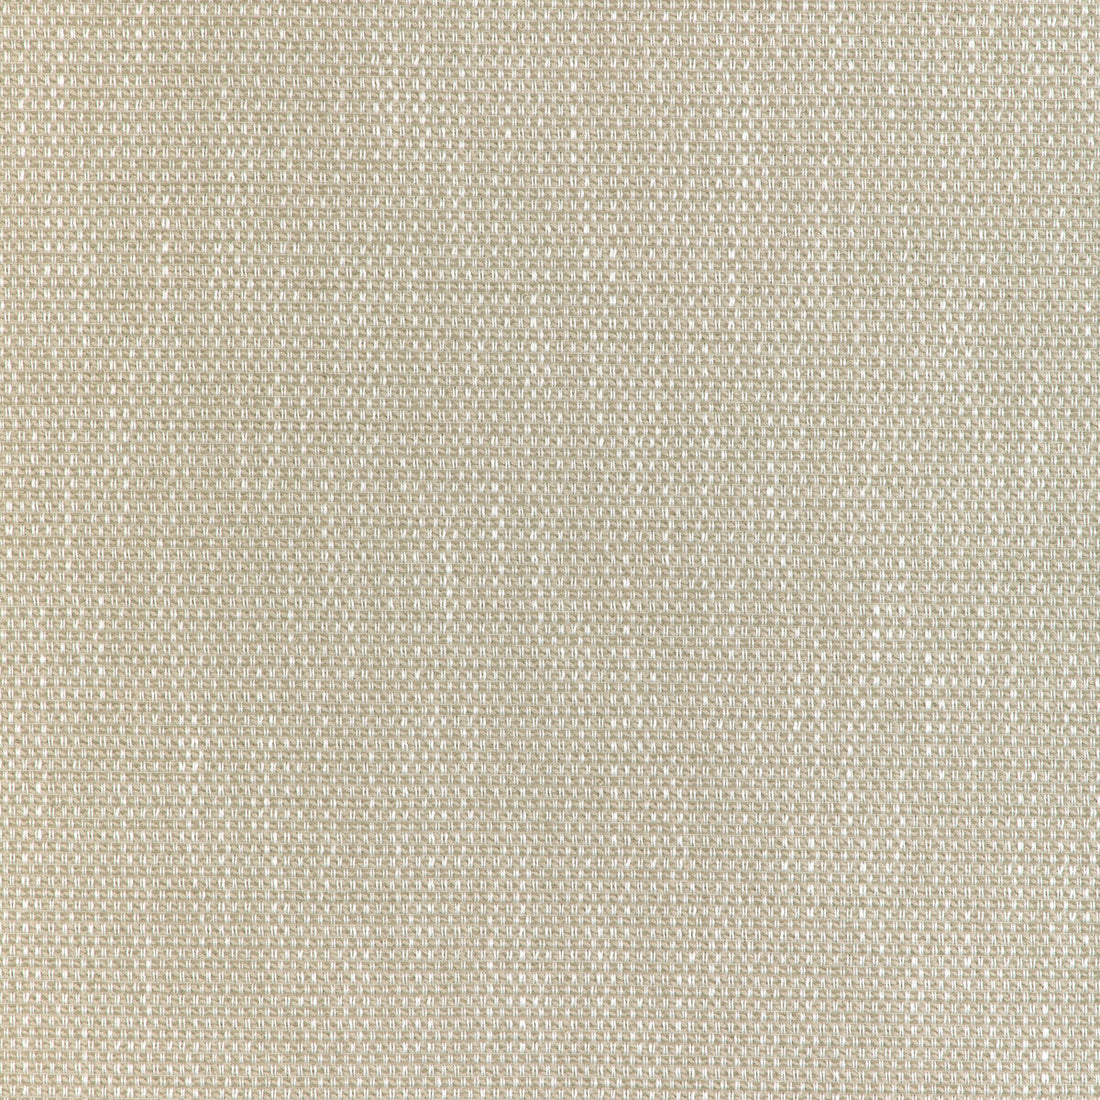 Narrows fabric in stone color - pattern 37049.16.0 - by Kravet Design in the Thom Filicia Latitude collection